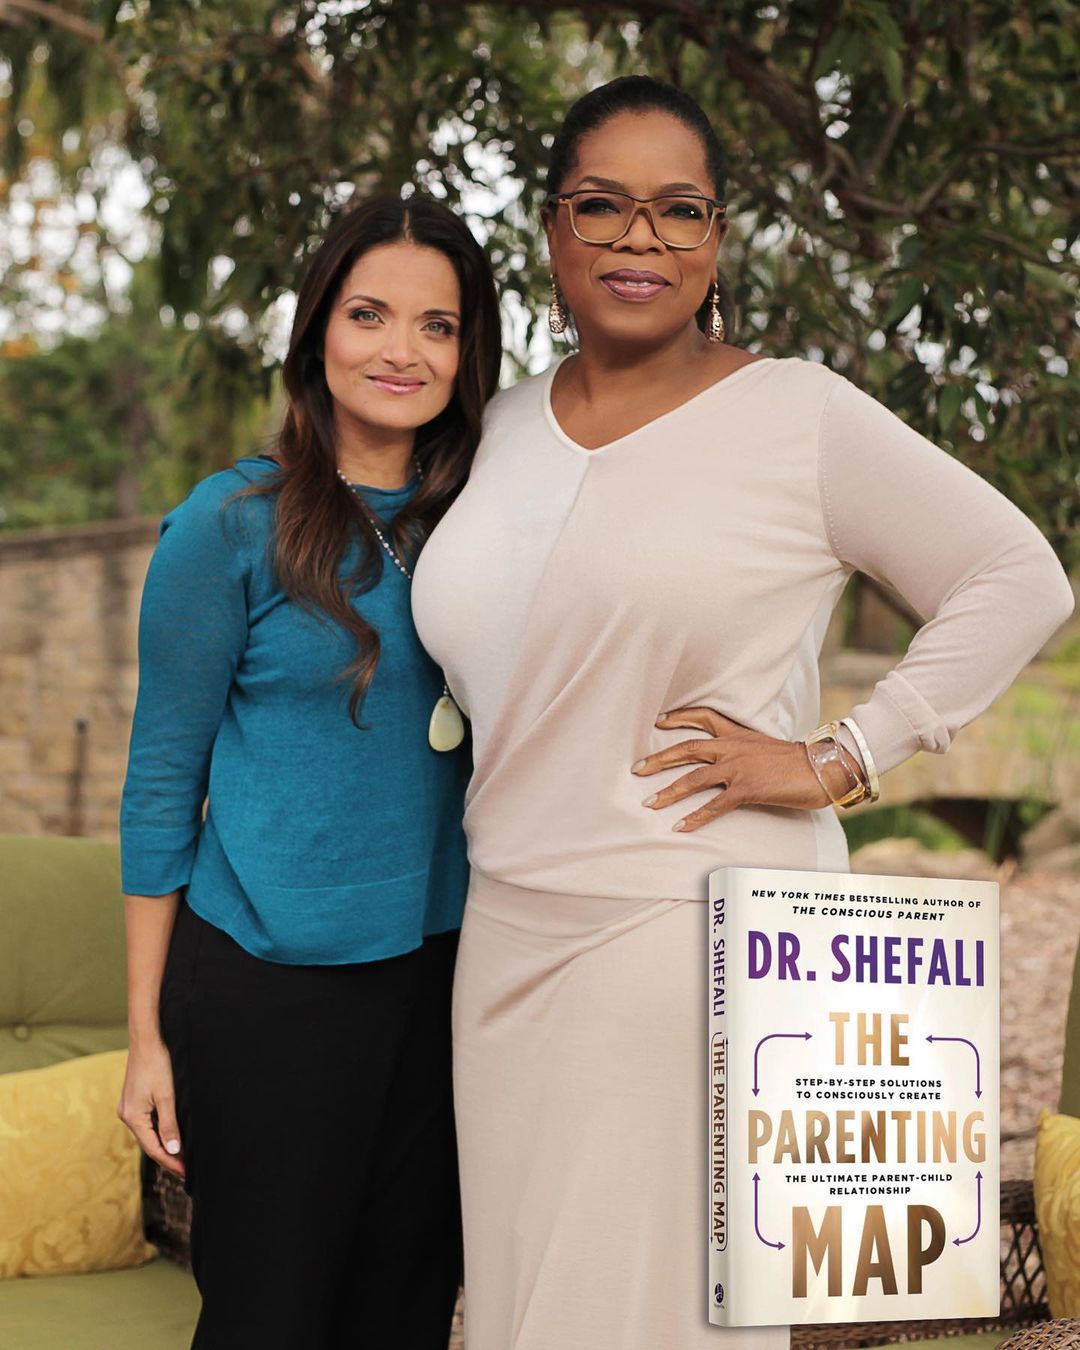 OPRAH  has no children, so why does  she  think or choose  the right person  who writes about parenting skills.Barnes and Noble  has hundreds of books of ppl who think their way is right. WHY HER?